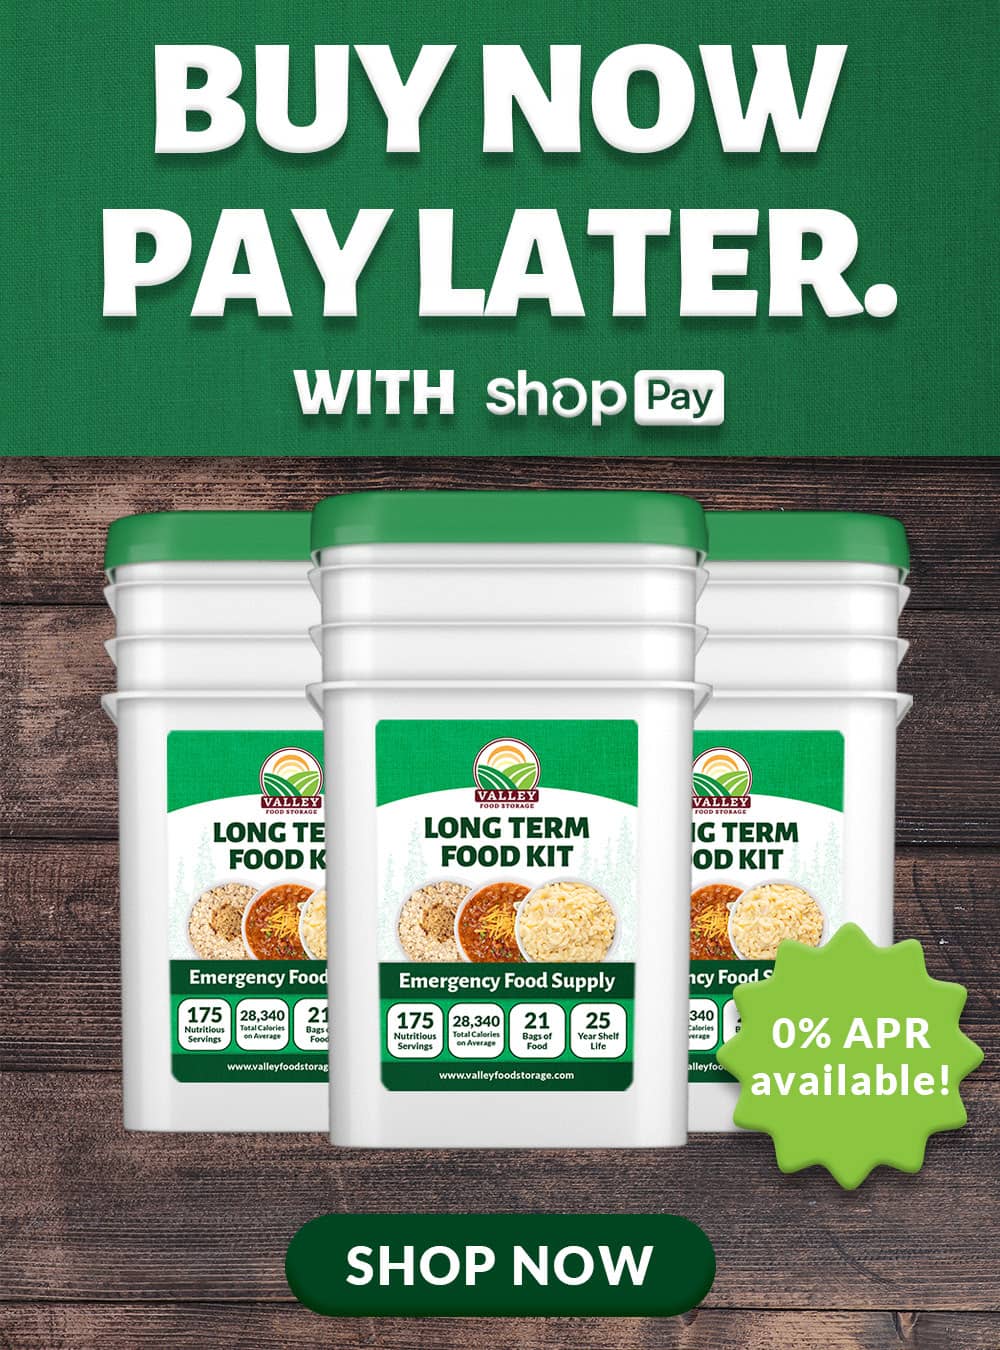 Buy Now Pay Later on Emergency Food at Valley Food Storage closetsamples